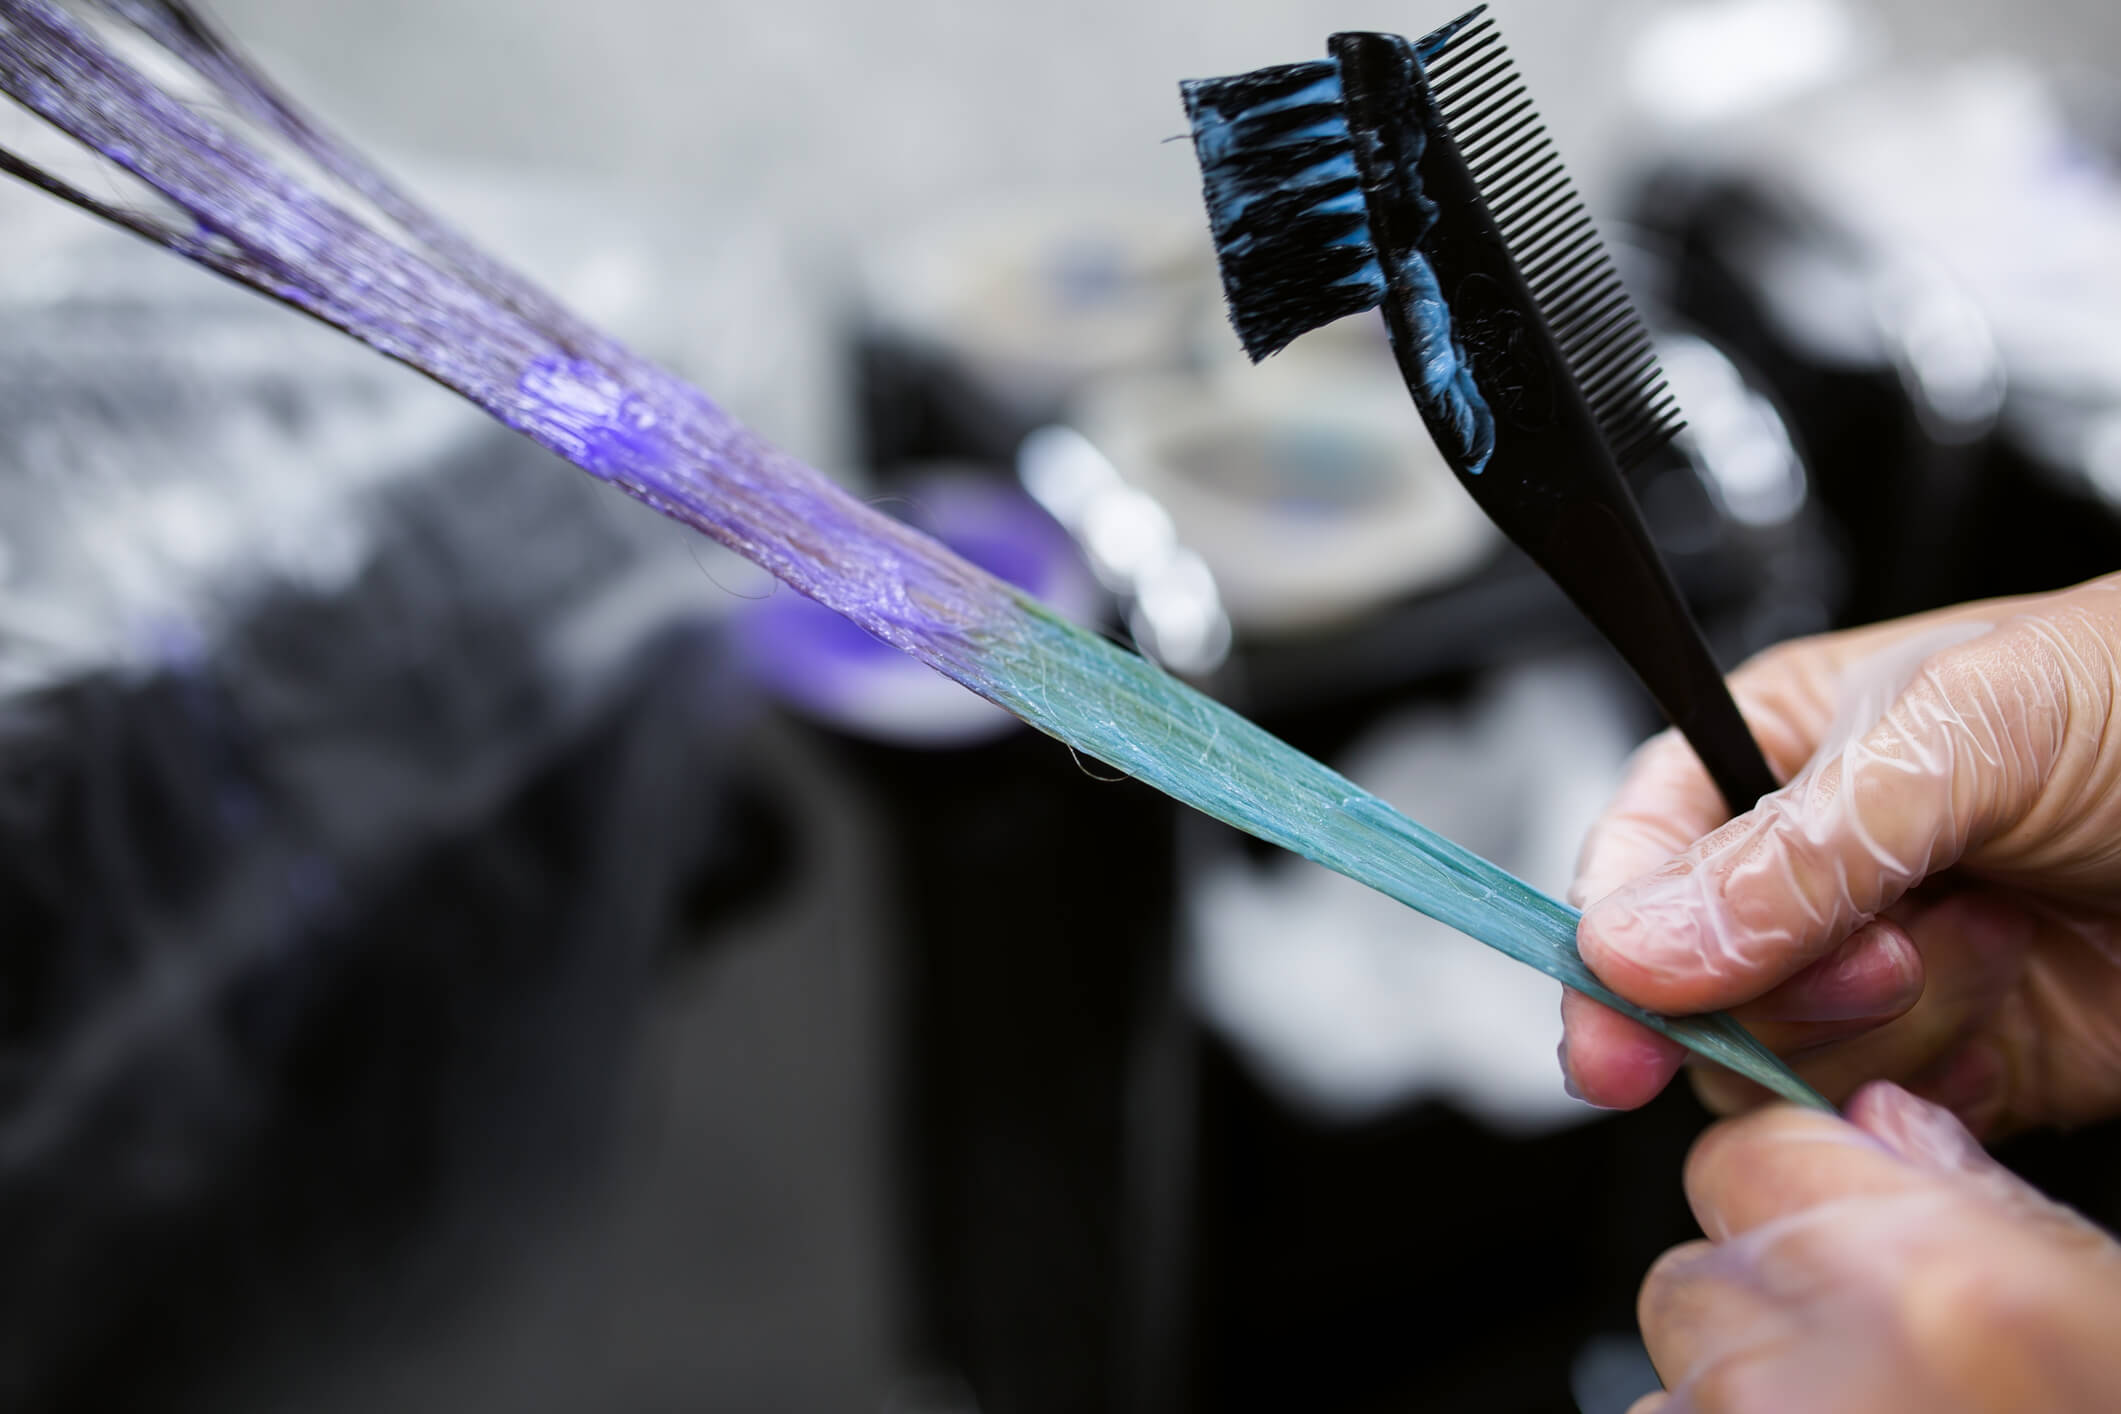 Image of a stylist with gloves dying long blue and purple hair